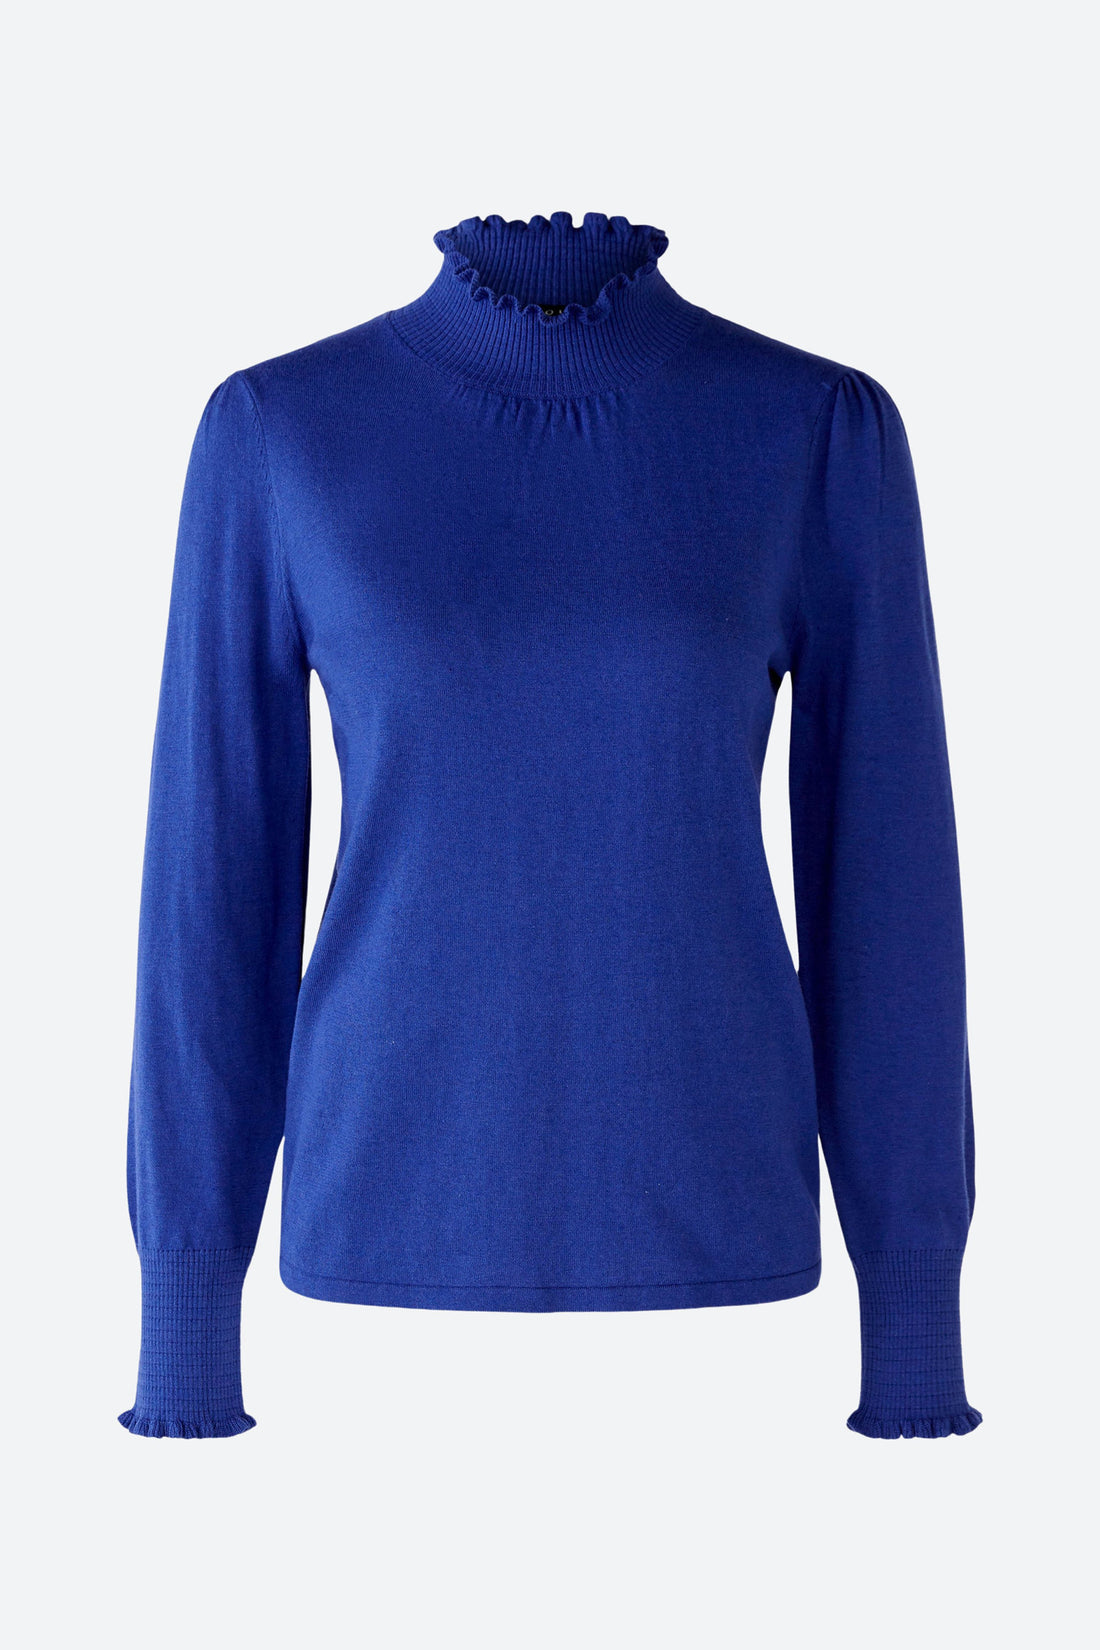 Jumper In Cotton Blend With Silk And Cashmere_79498_5410_01